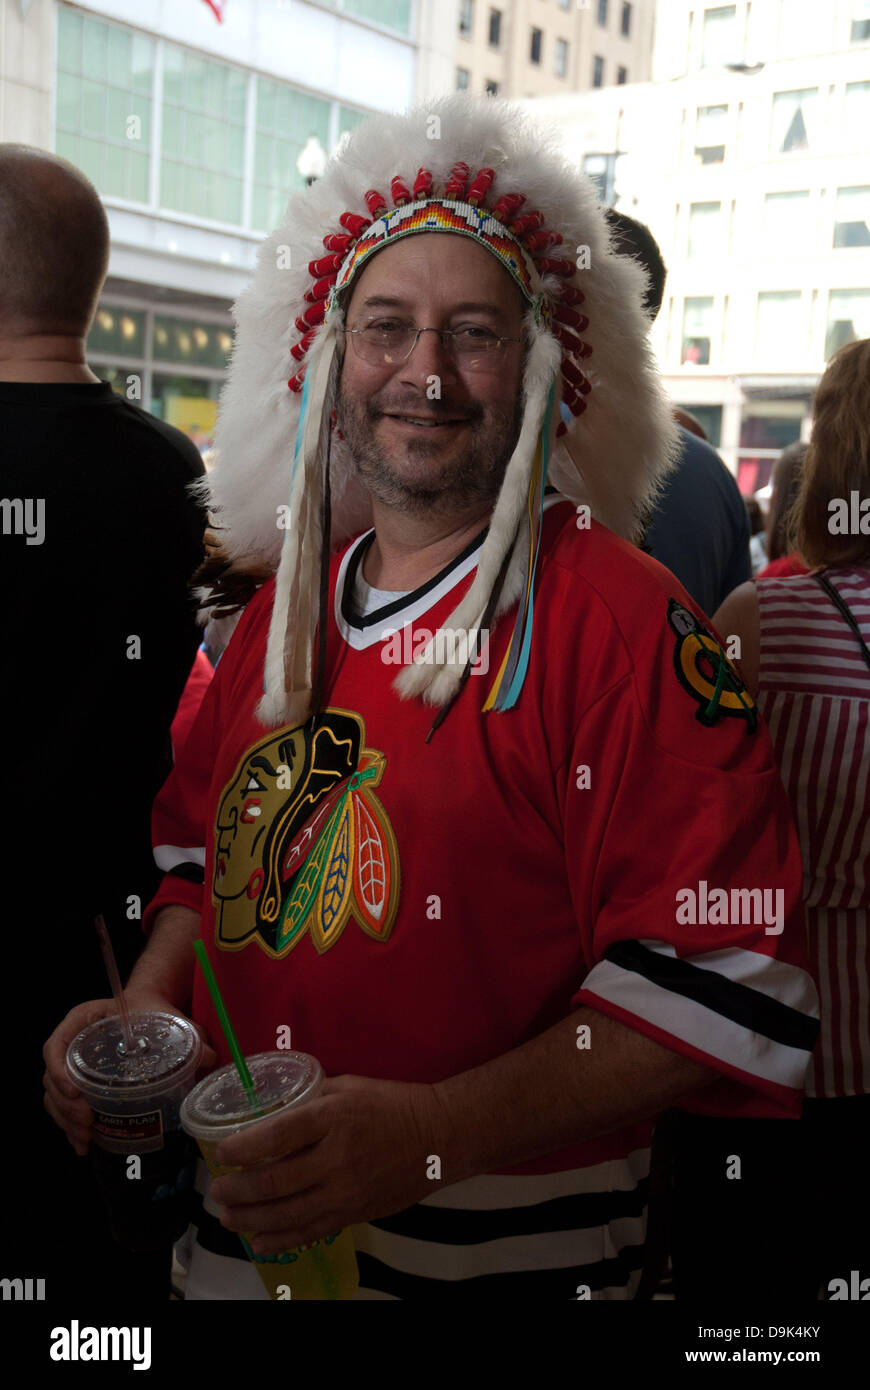 Jun 11, 2010 - Chicago, Illinois, U.S. - Fan carries fake Stanley cup on  Wacker Drive. Parade on Michigan Avenue to celebrate the Stanley Cup 2010  championship win of the Chicago Blackhawks